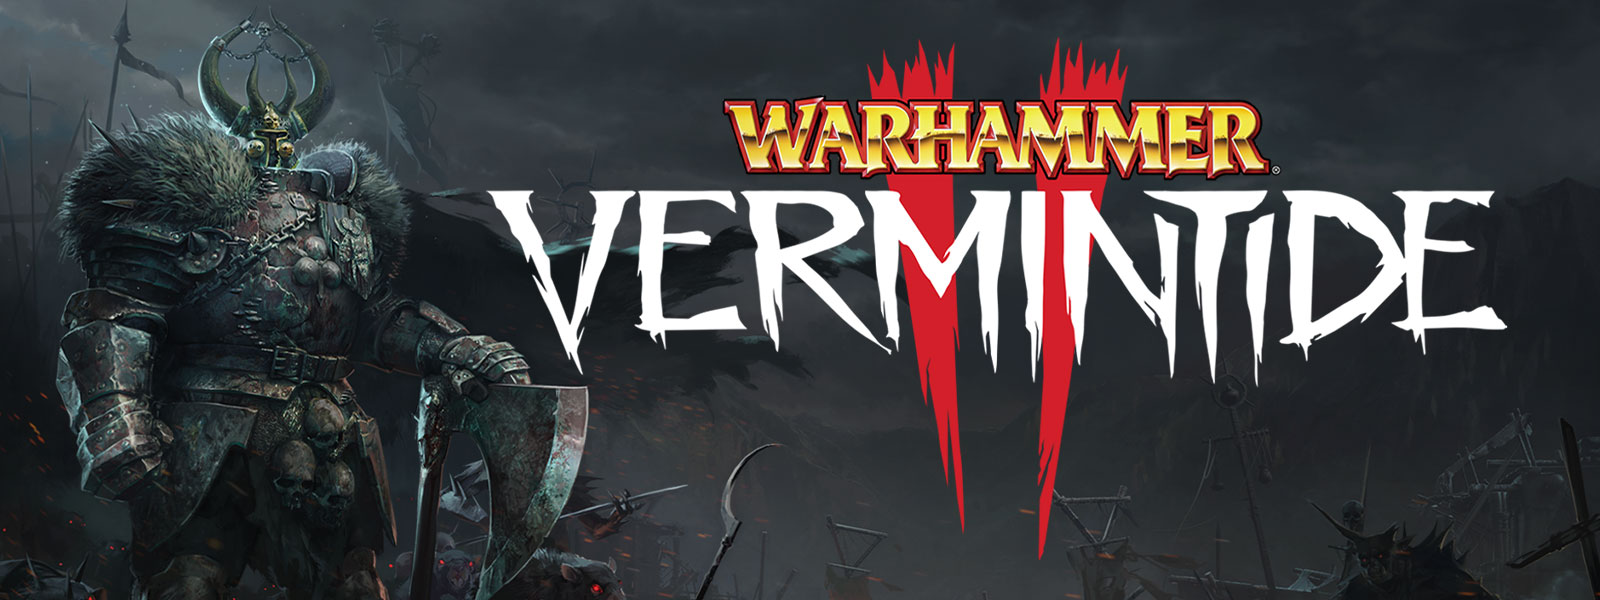 Warhammer: Vermintide 2, An armoured figure with fur pauldrons stands at the vanguard of an army of rats with glowing eyes.